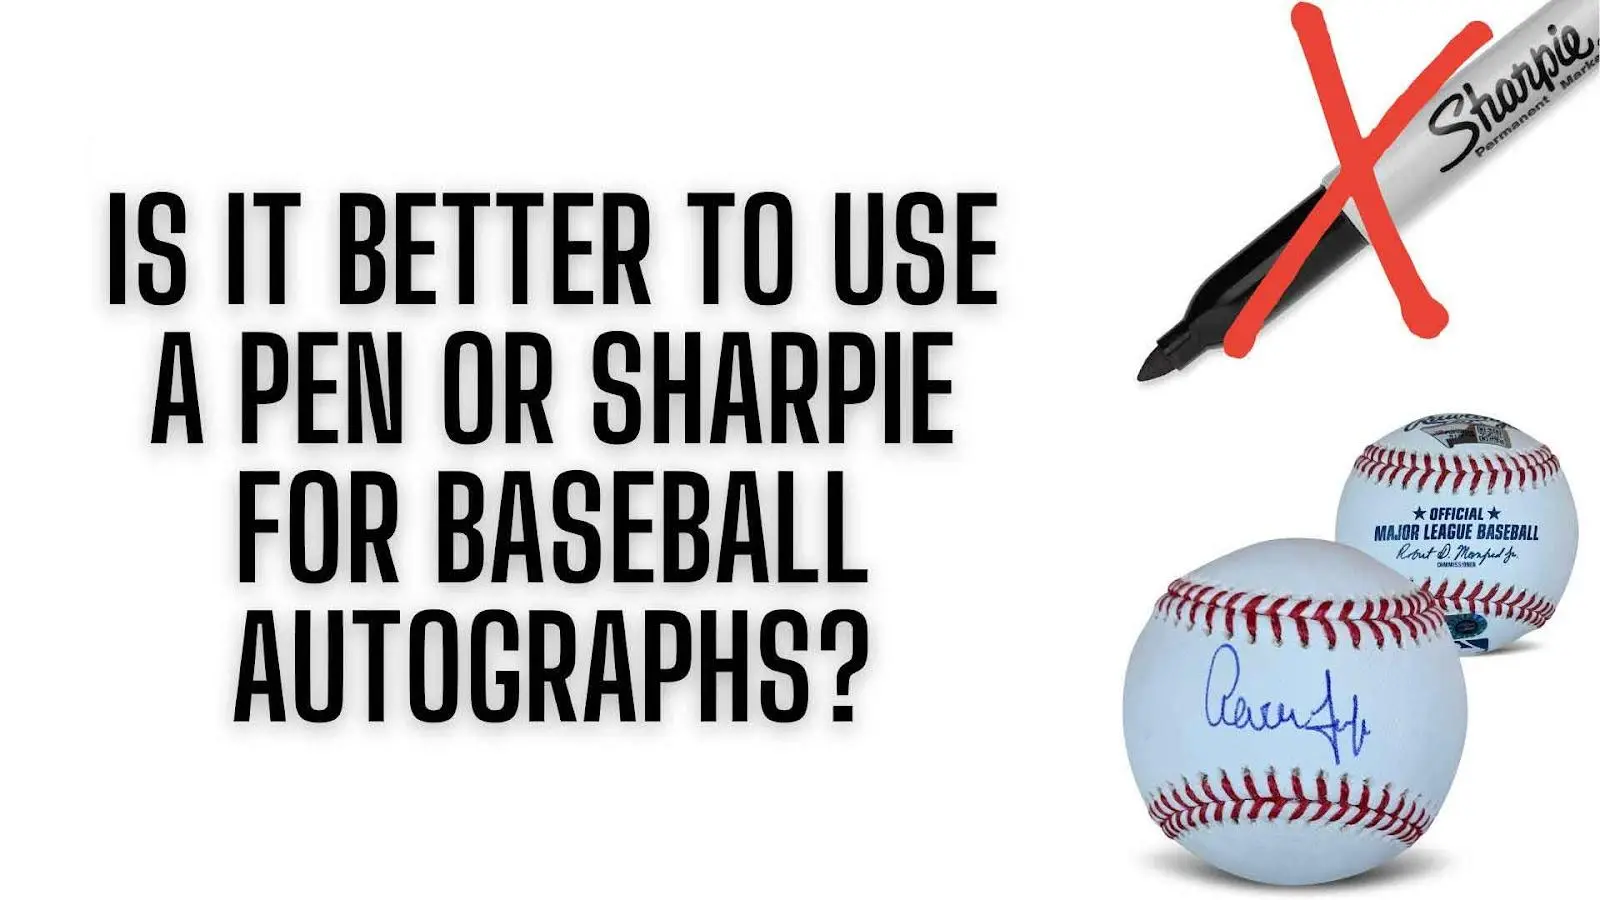 Is It Better to Use a Pen or Sharpie for Baseball Autographs